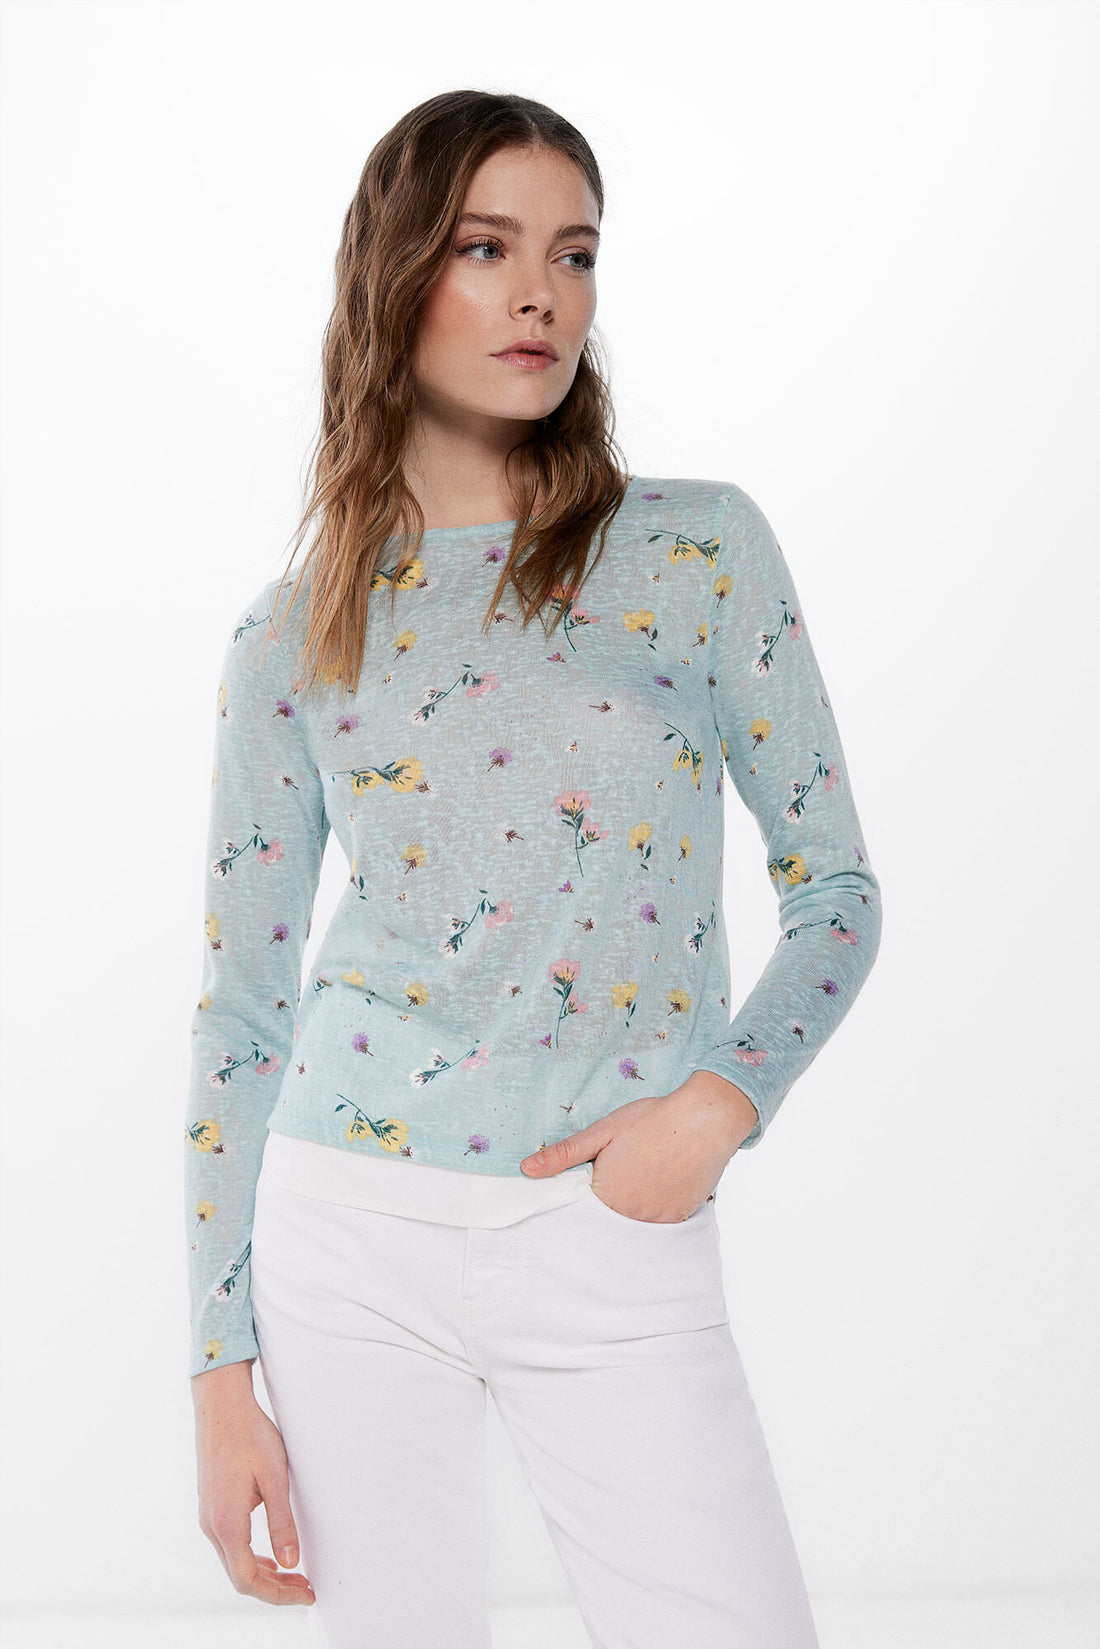 Long Sleeve T Shirt With Floral Print_6765945_28_01